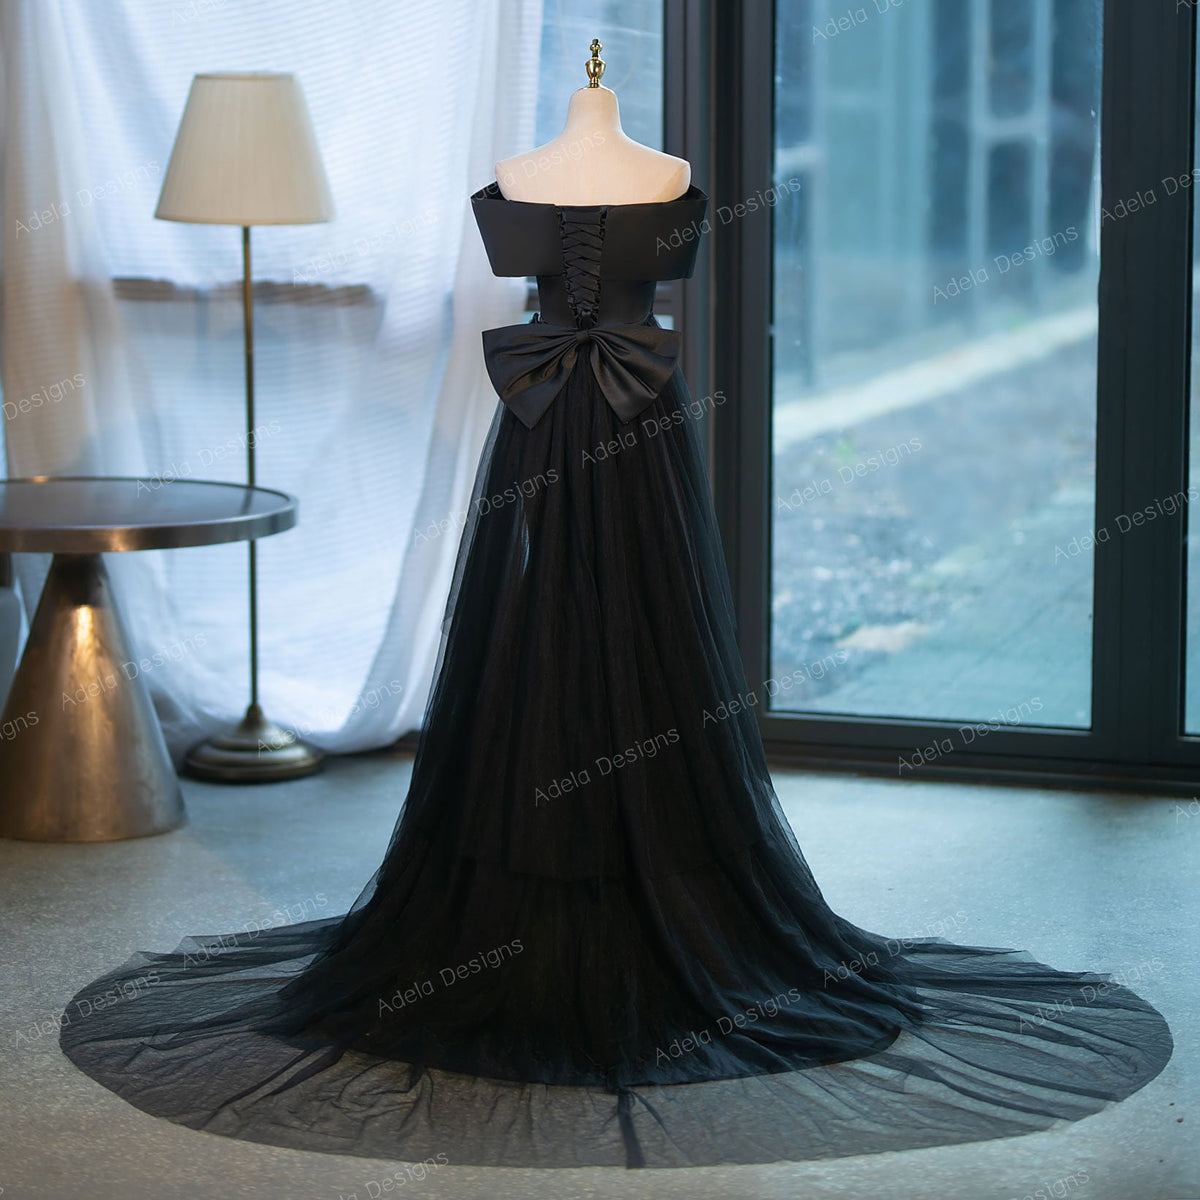 Gothic Black Fit And Flare Mermaid Satin Wedding Dress Bridal Gown Off the Shoulder Neckline Open Back Detachable Train Big Bow in Back